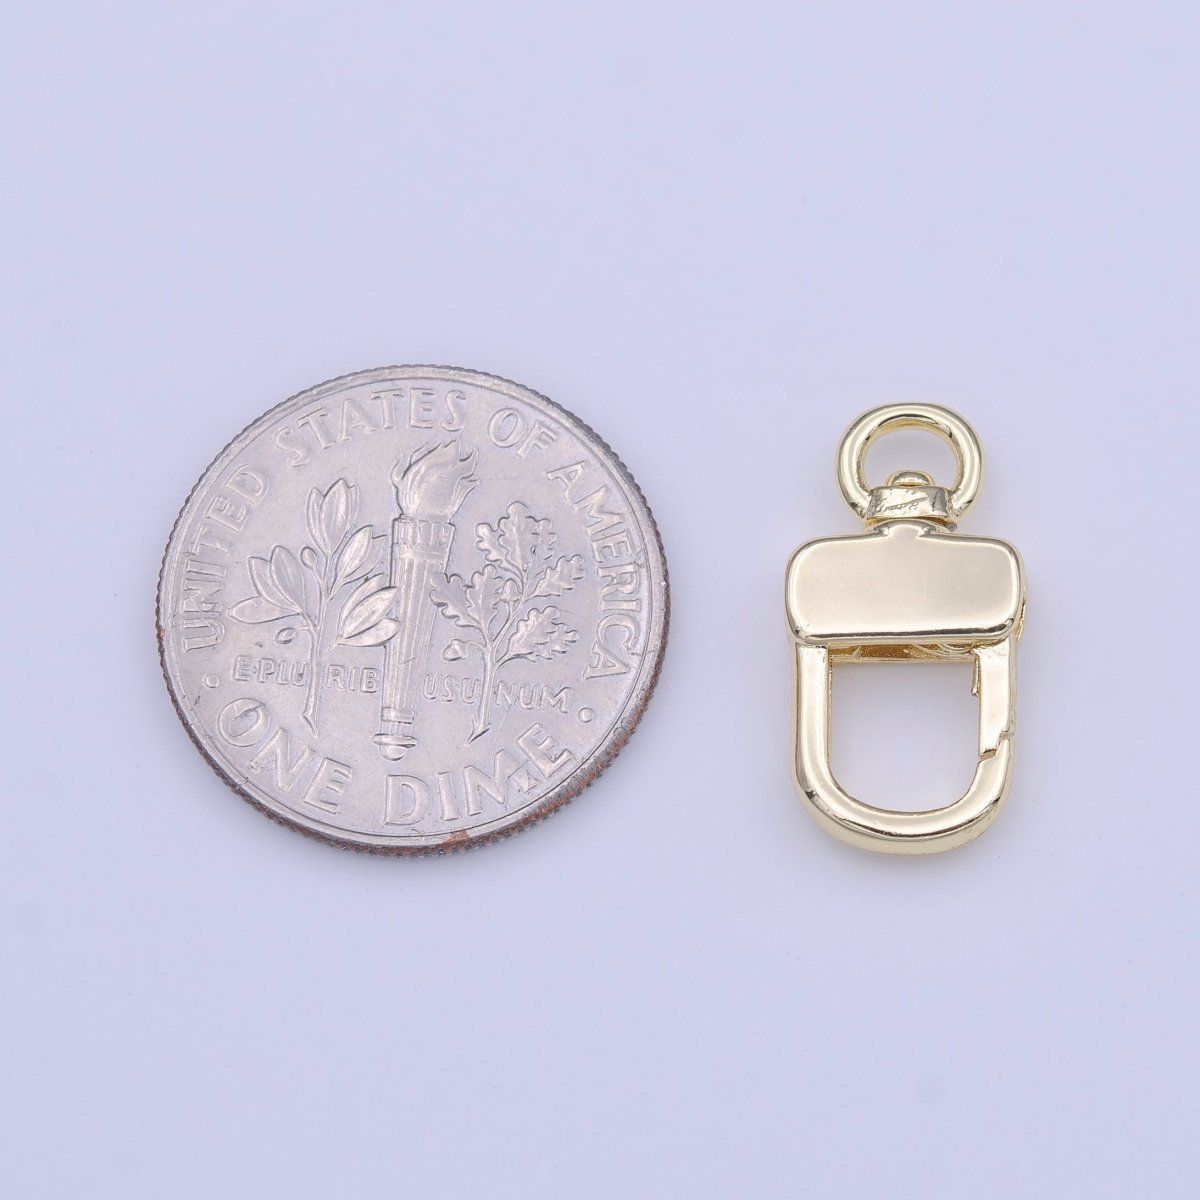 Small Gold Swivel Parrot Snap Push Gate Clasps Closure For Jewelry Making | K-248 - DLUXCA